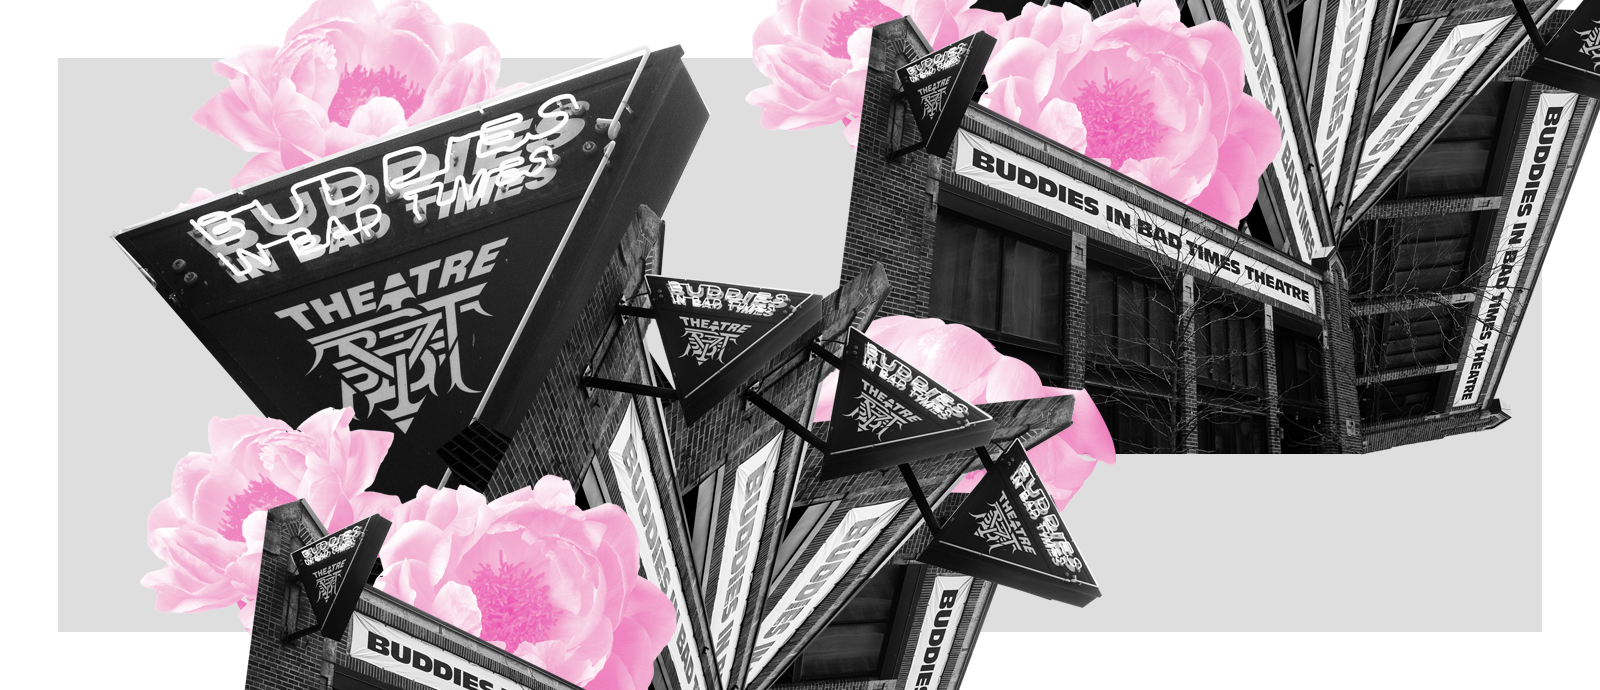 Black and white photograph of Buddies in Bad Times Theatre sign duplicated in a collage over itself in a semi circle, with a landscape black and white photo of the front of the building also duplicated and rotated clockwise up into the right corner, overtop a grey background with a white border and light pink flowers peeking out from underneath the collages.